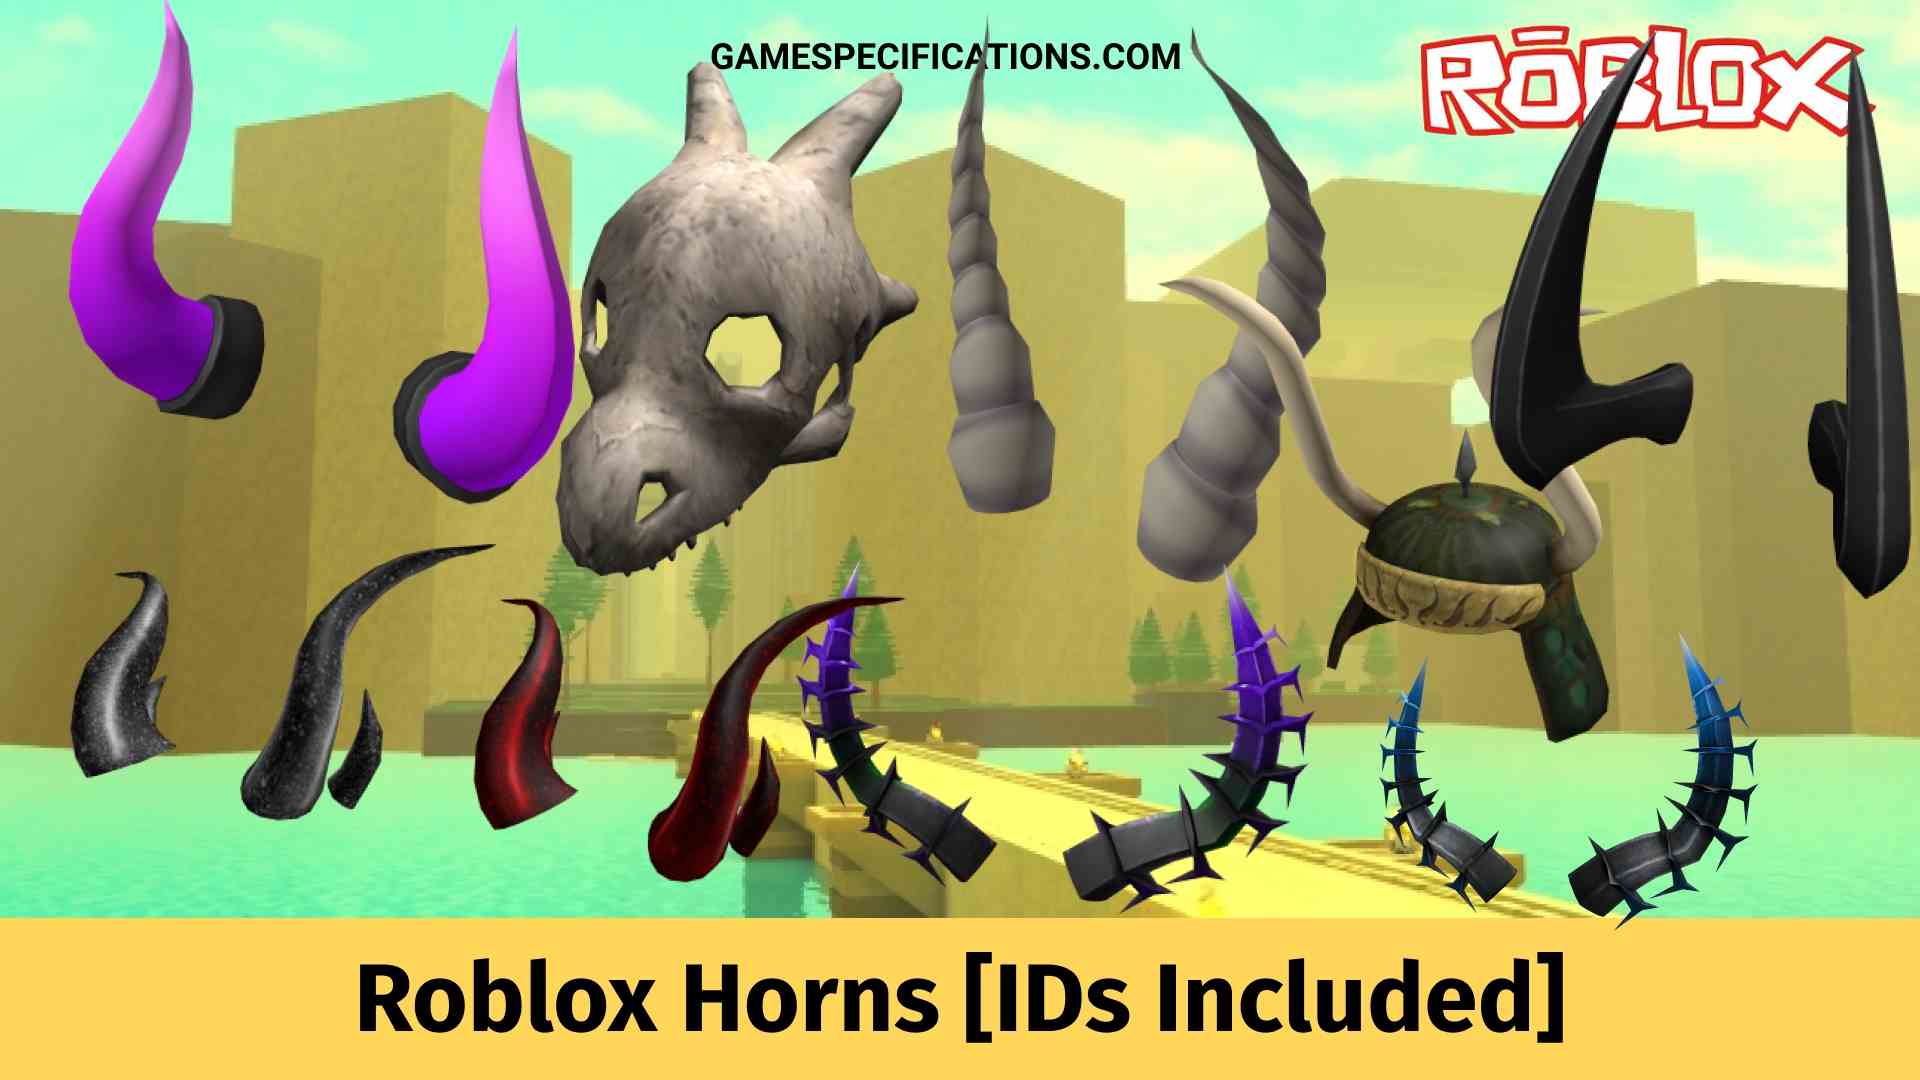 23 Roblox Horns To Awesome Devilish Look Ids Included Game Specifications - roblox catalog id's